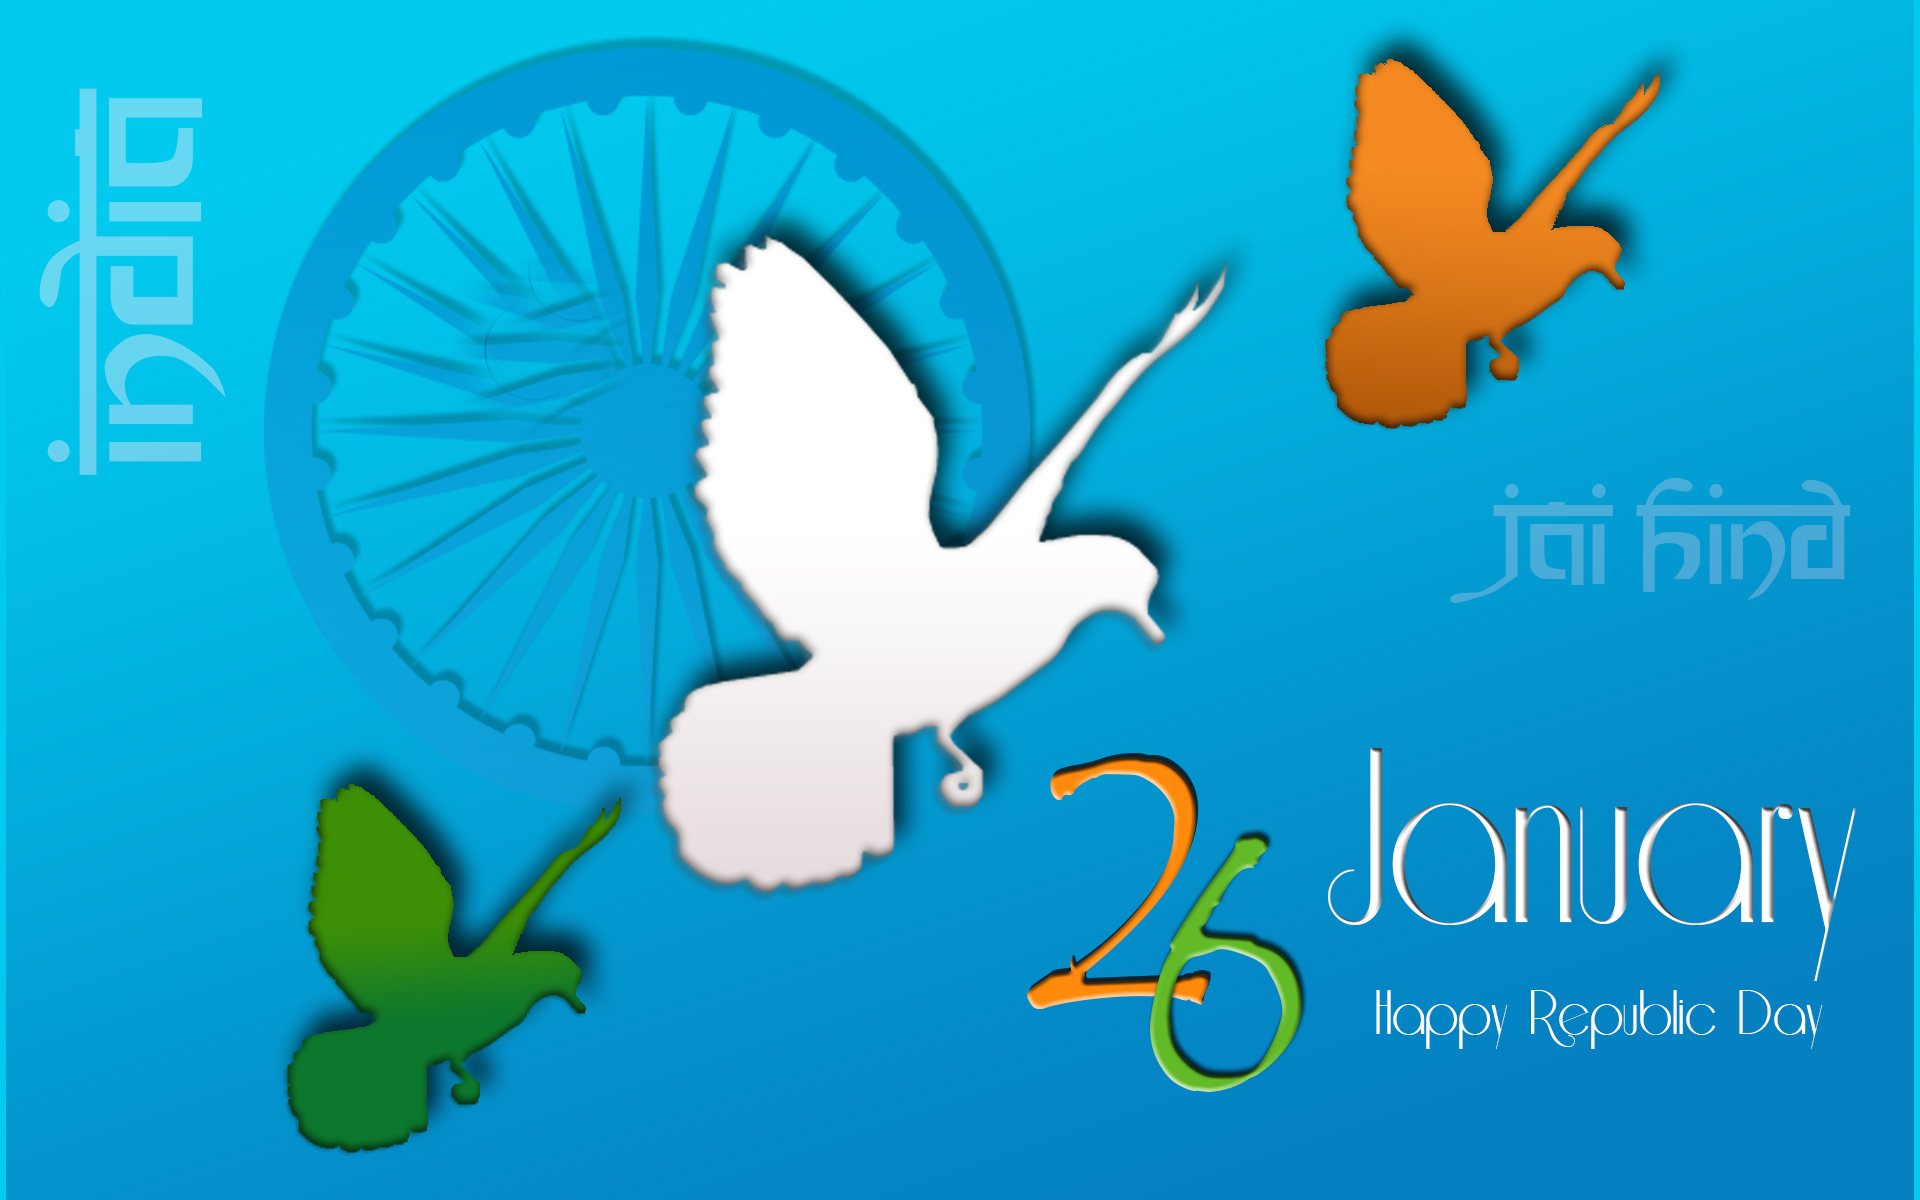 26th January}* Republic Day 2022 FB Cover Photo, Image, Wallpaper & Banners